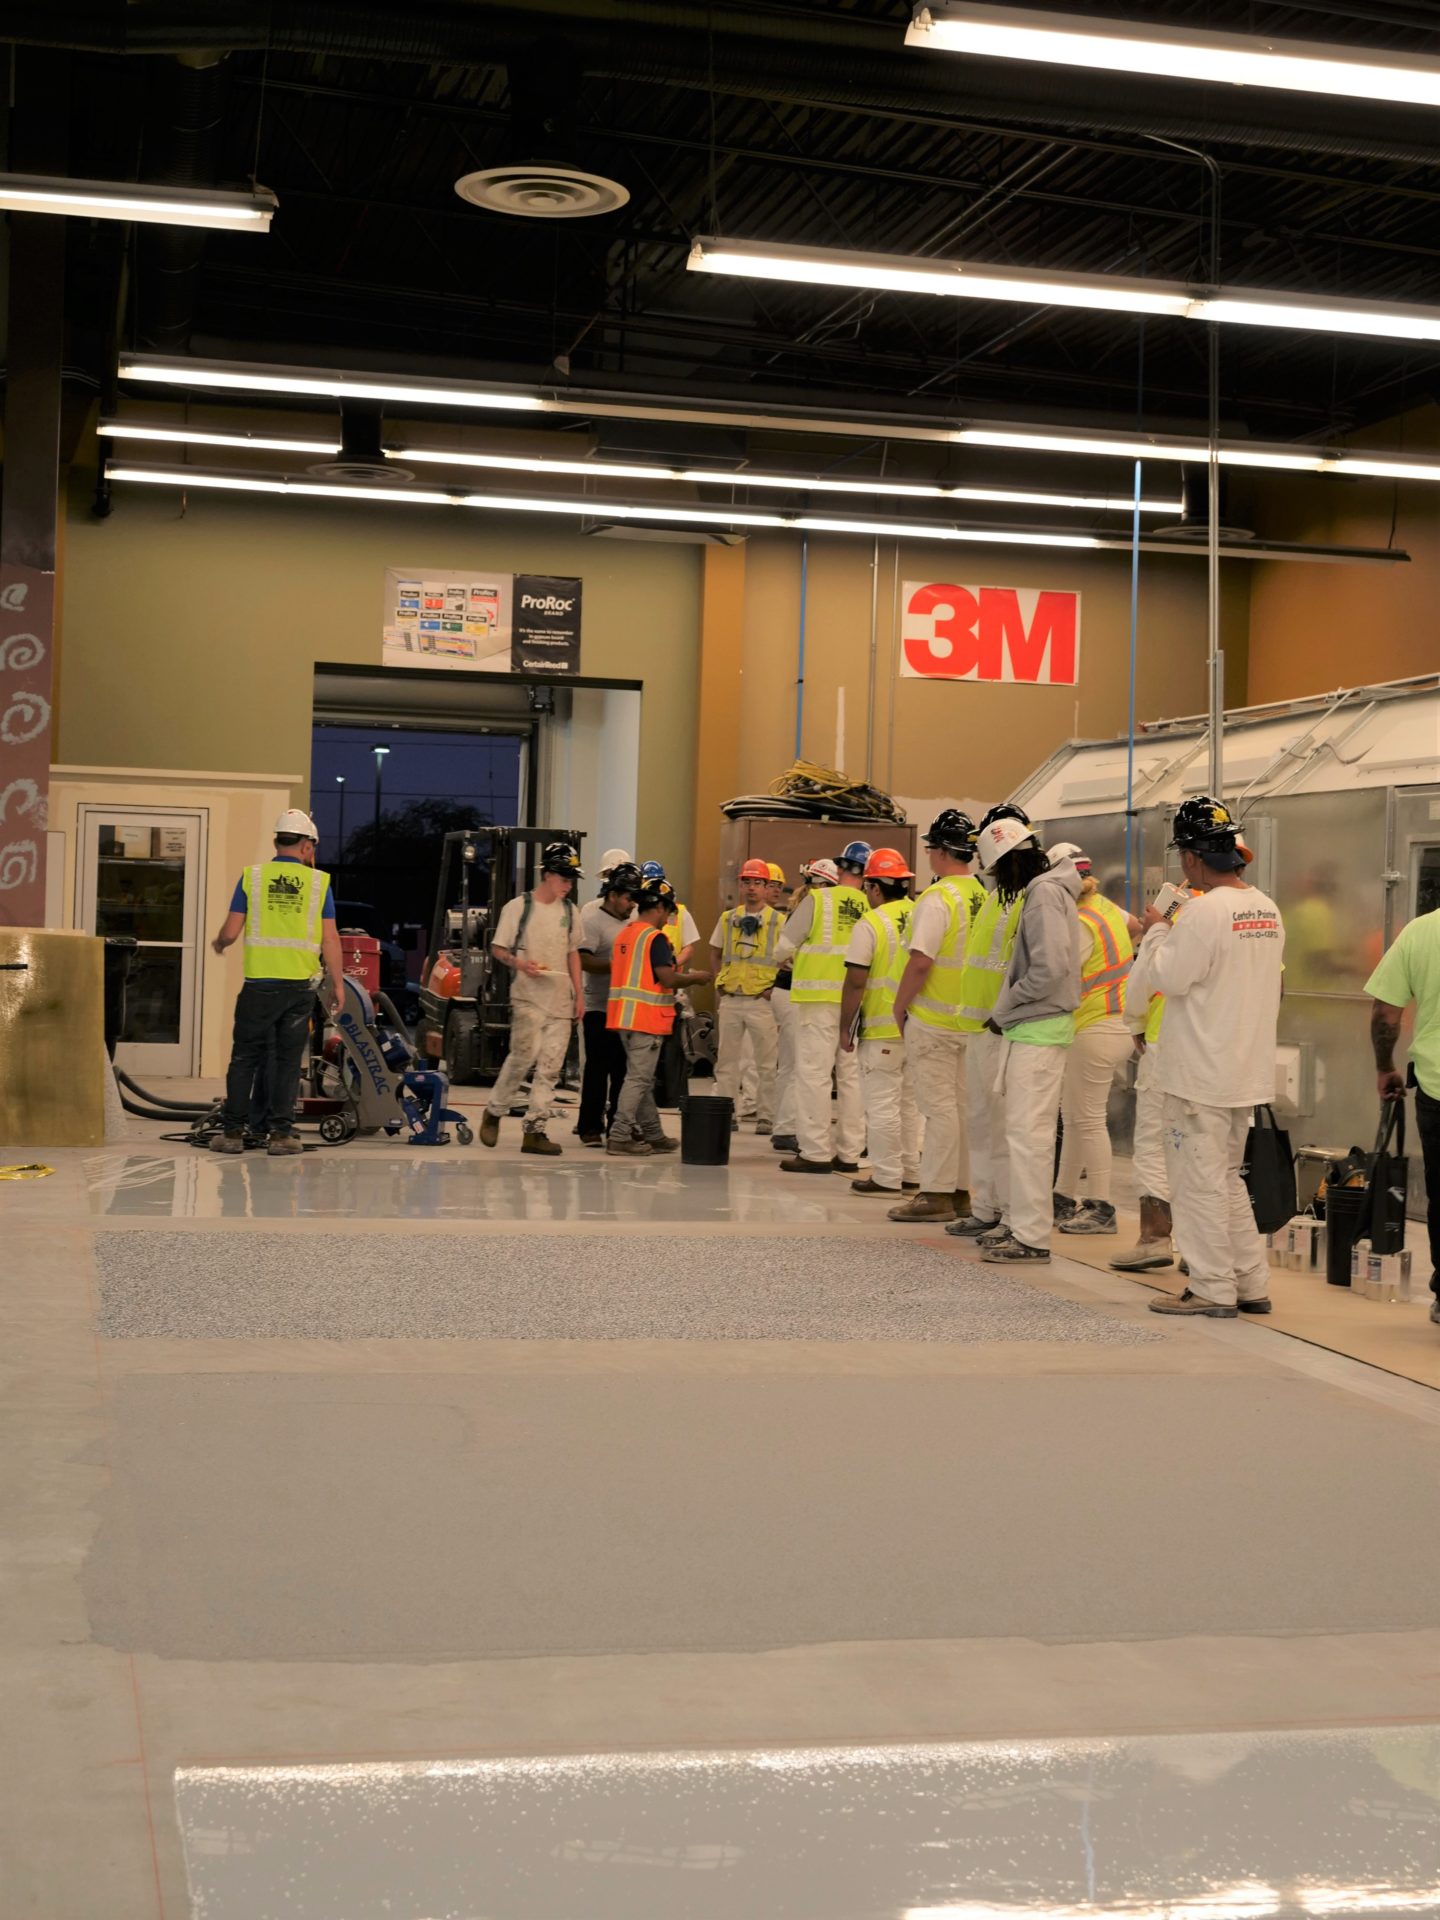 Image from the Gallery: Epoxy Training – Las Vegas, NV